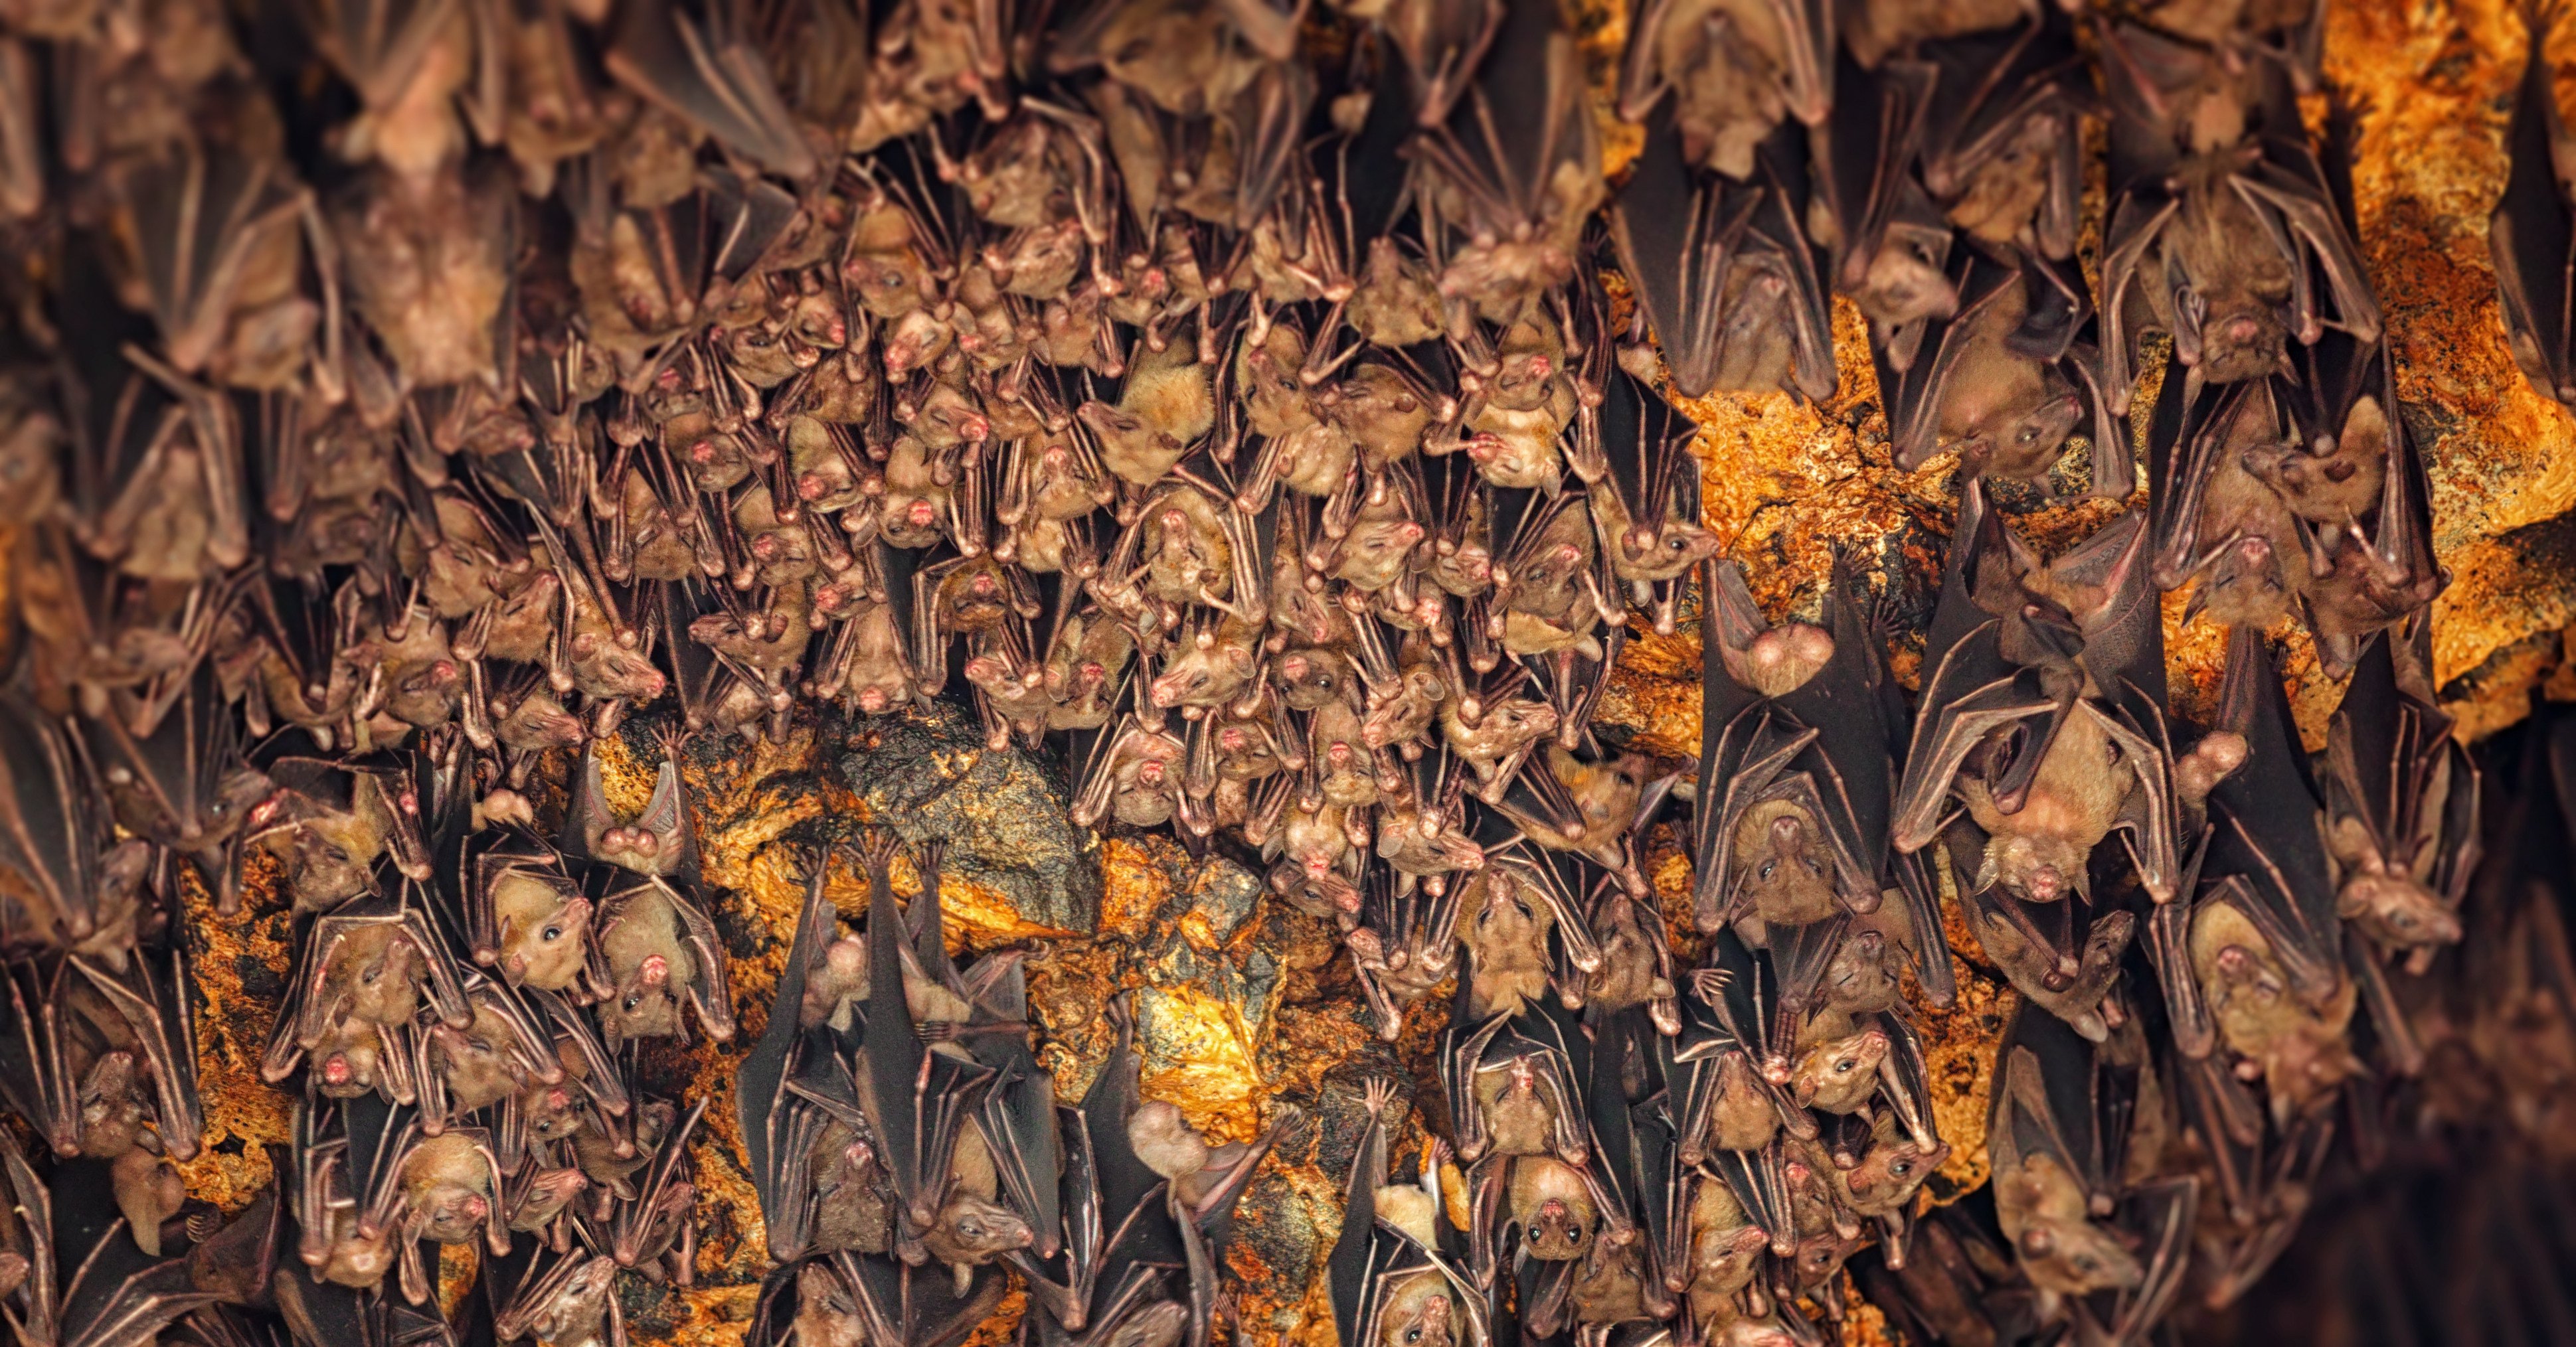 Bats hang from the ceiling of Goa Lawah Bat Cave Temple  in Bali, Indonesia. Photo: Shutterstock